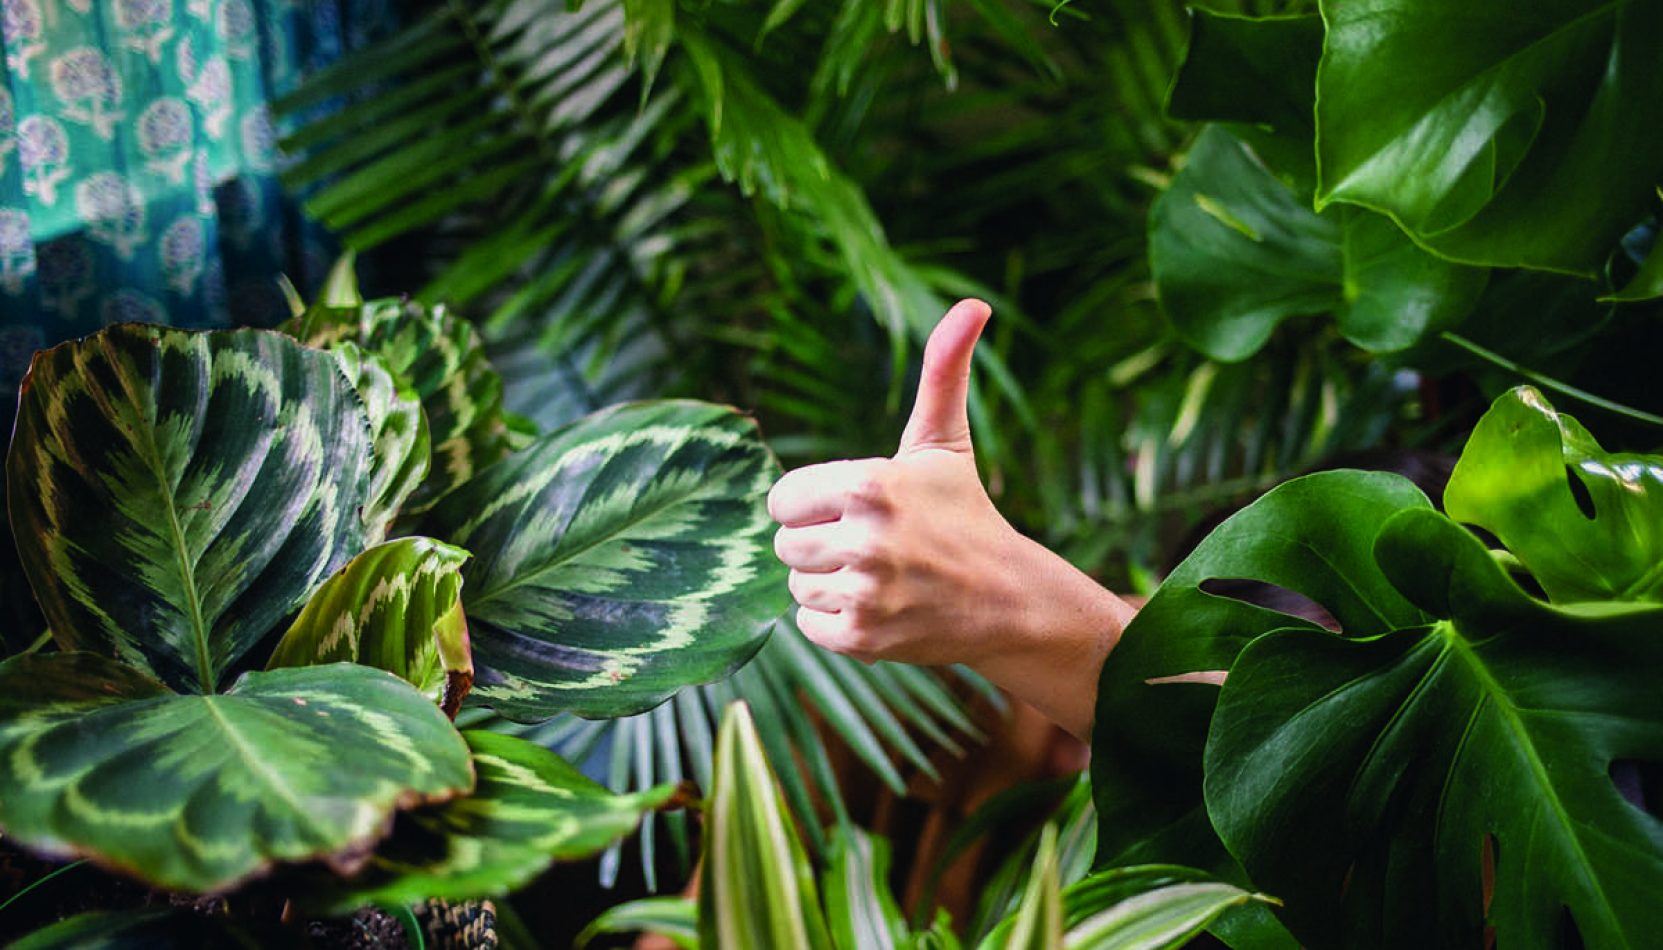 HOUSE PLANTS, how to keep your conservatory cool in the summer, summer, heatwave, keep your house cool, property news, move to property news, DIY, tips, how to, house and garden, surrey, guildford, woking, farnham,, kingston, richmond, south west london